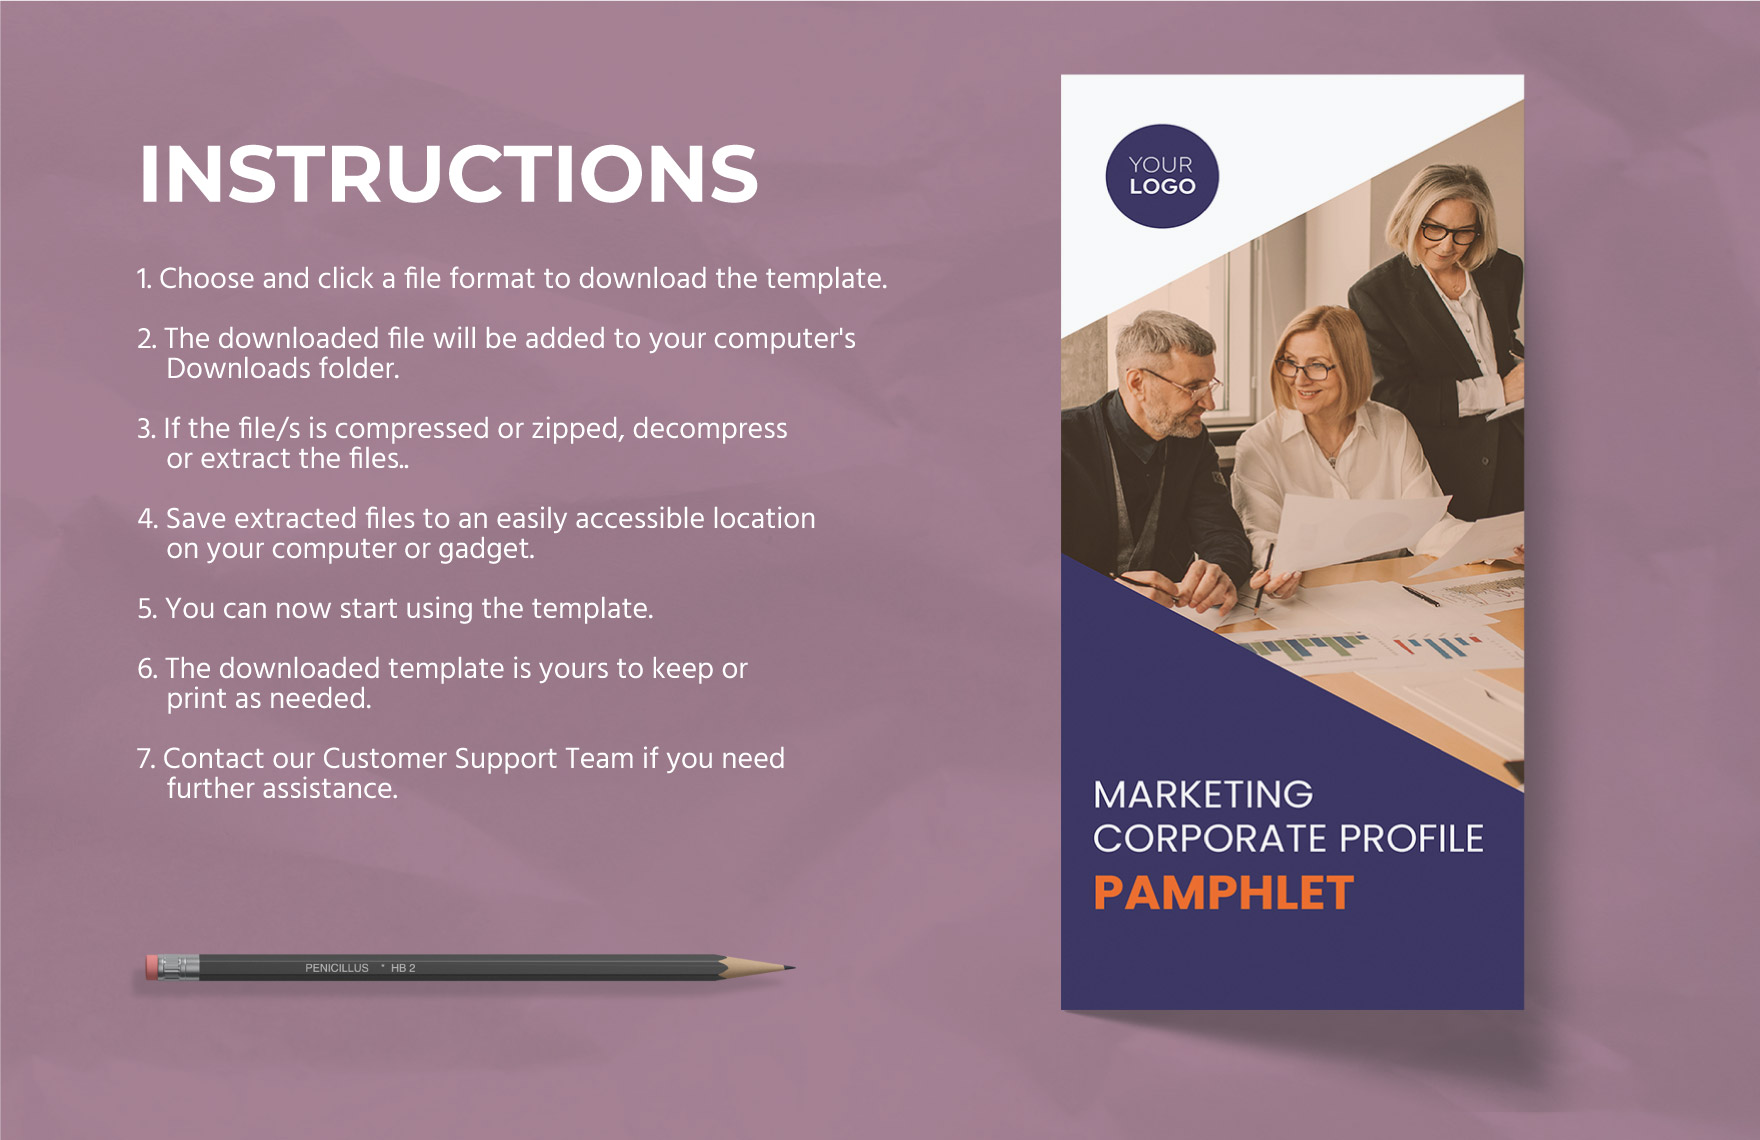 Marketing Corporate Profile Pamphlet Template